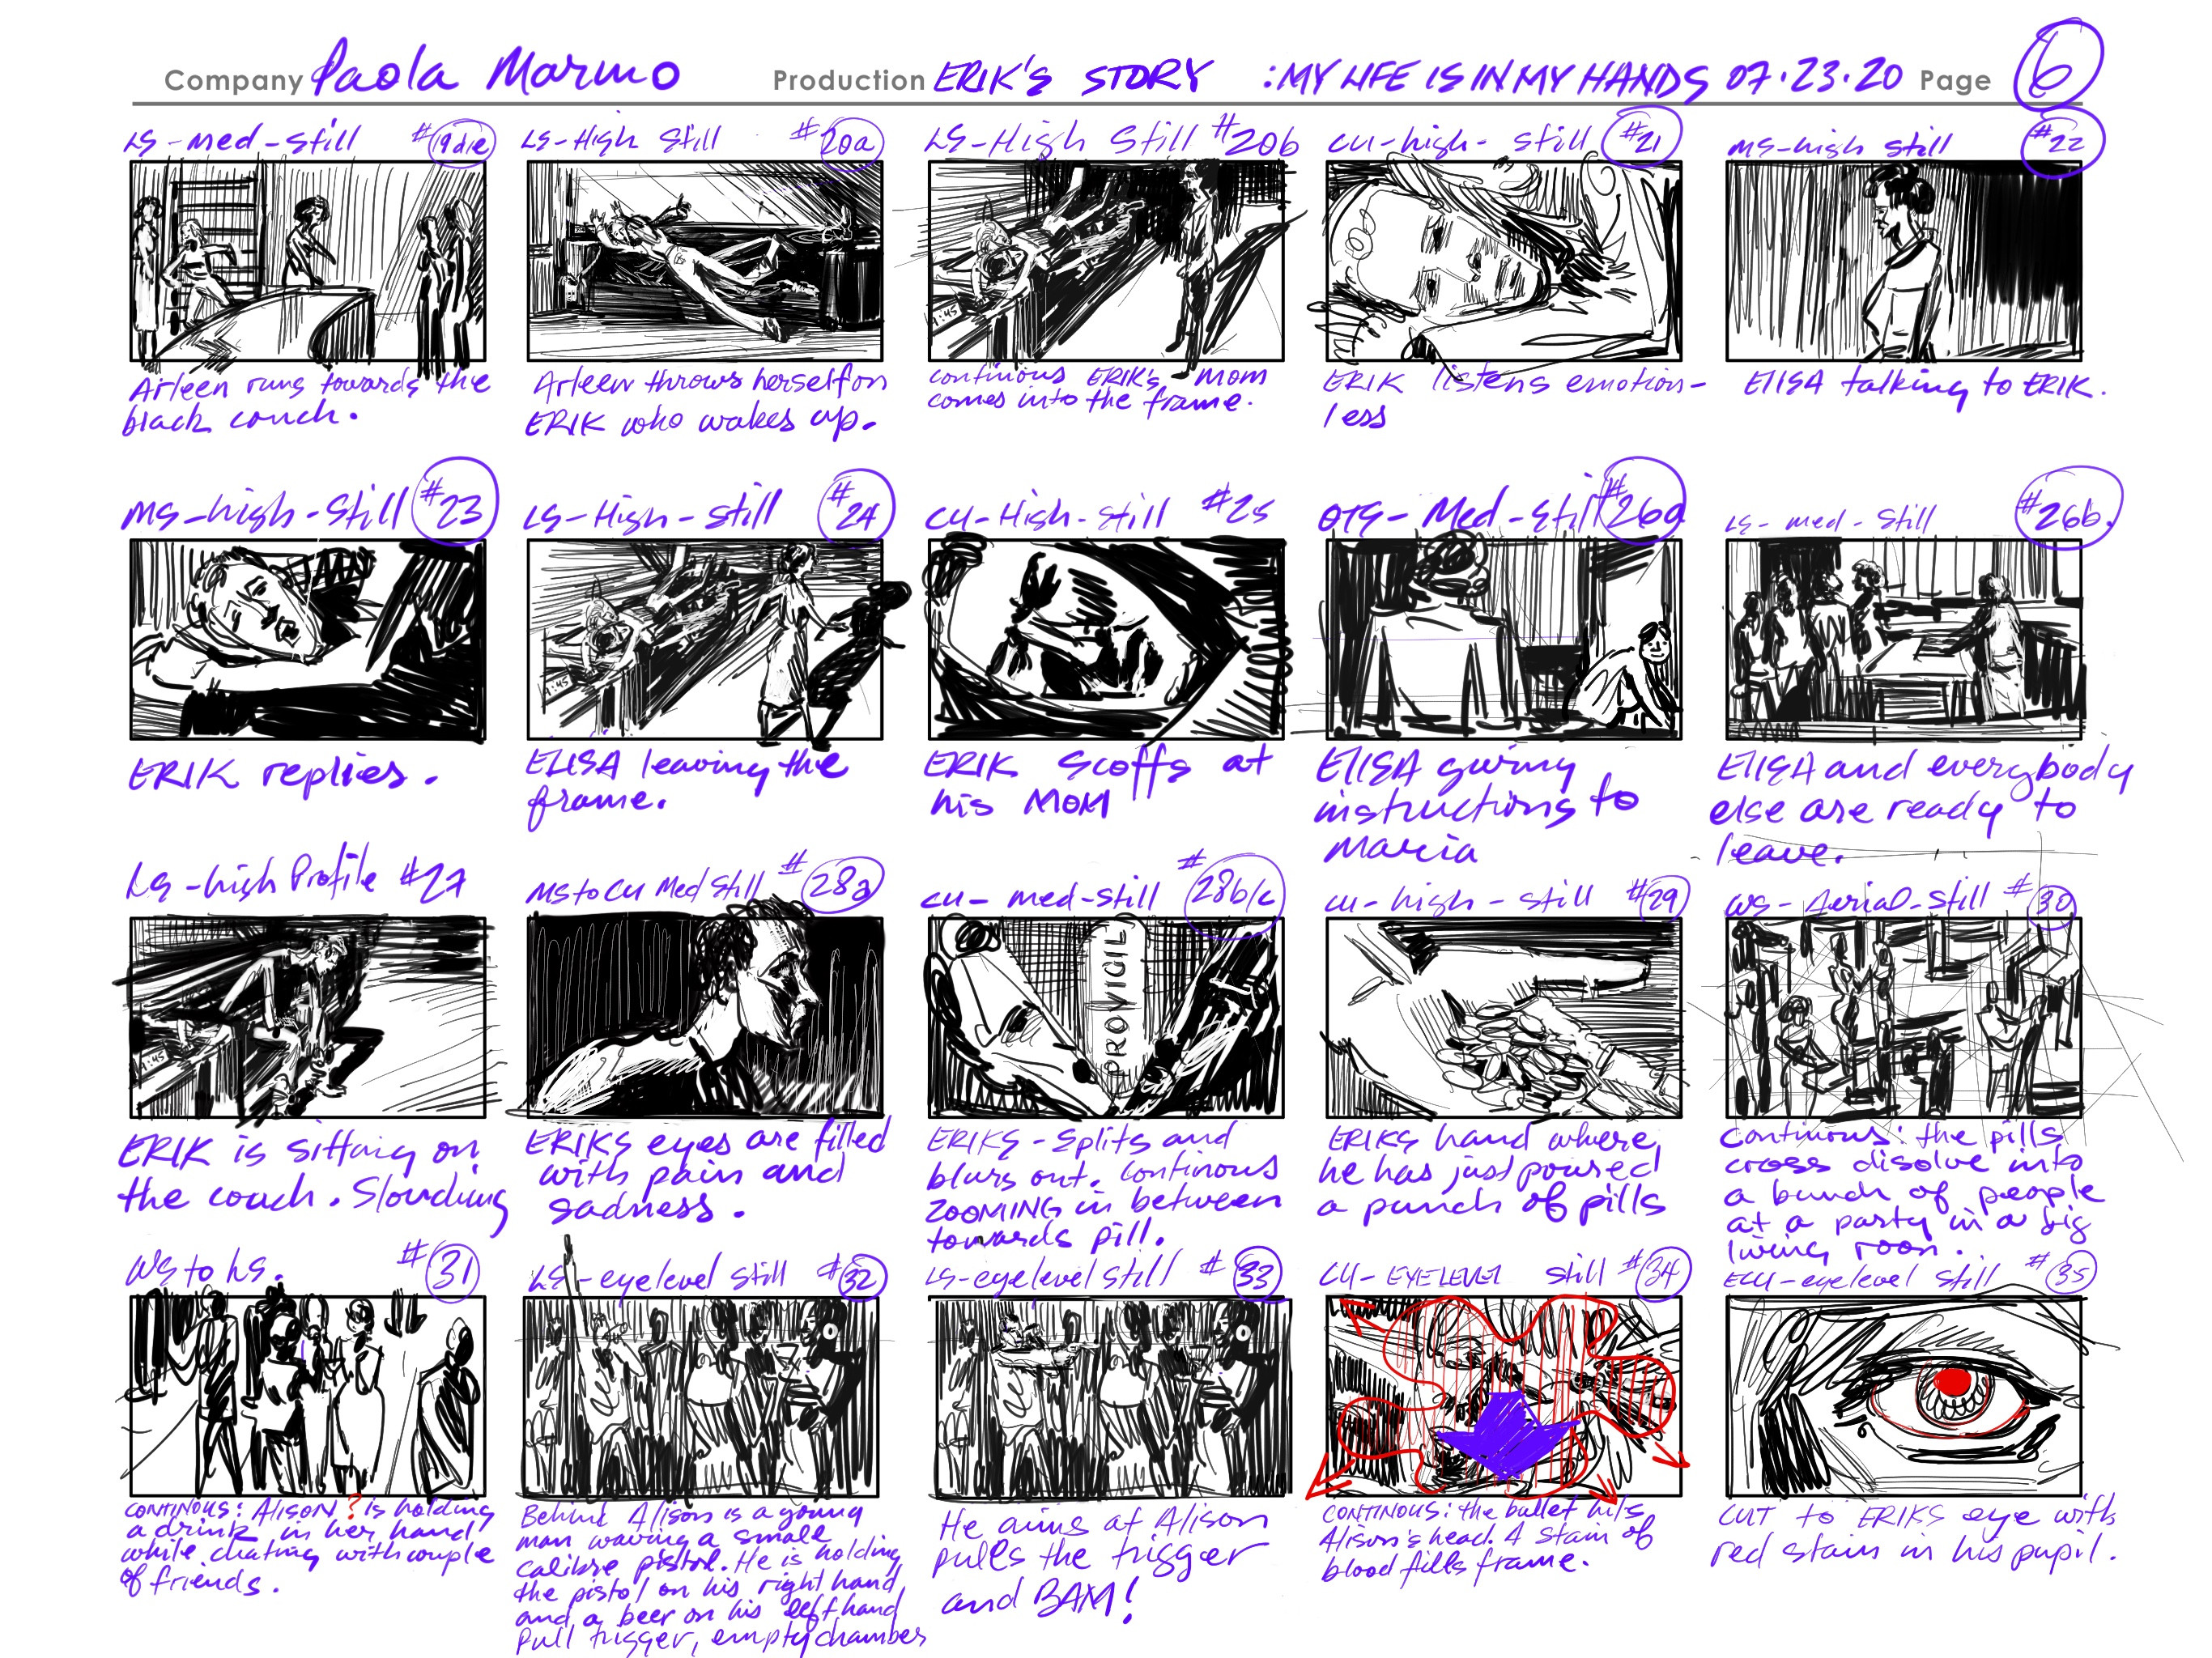 Thumbnails for a Paola Marino film created by VInce Mancuso. When you do a first pass you should do it quick. It is a gesture. The focus should be on the broad strokes or the large shapes. 